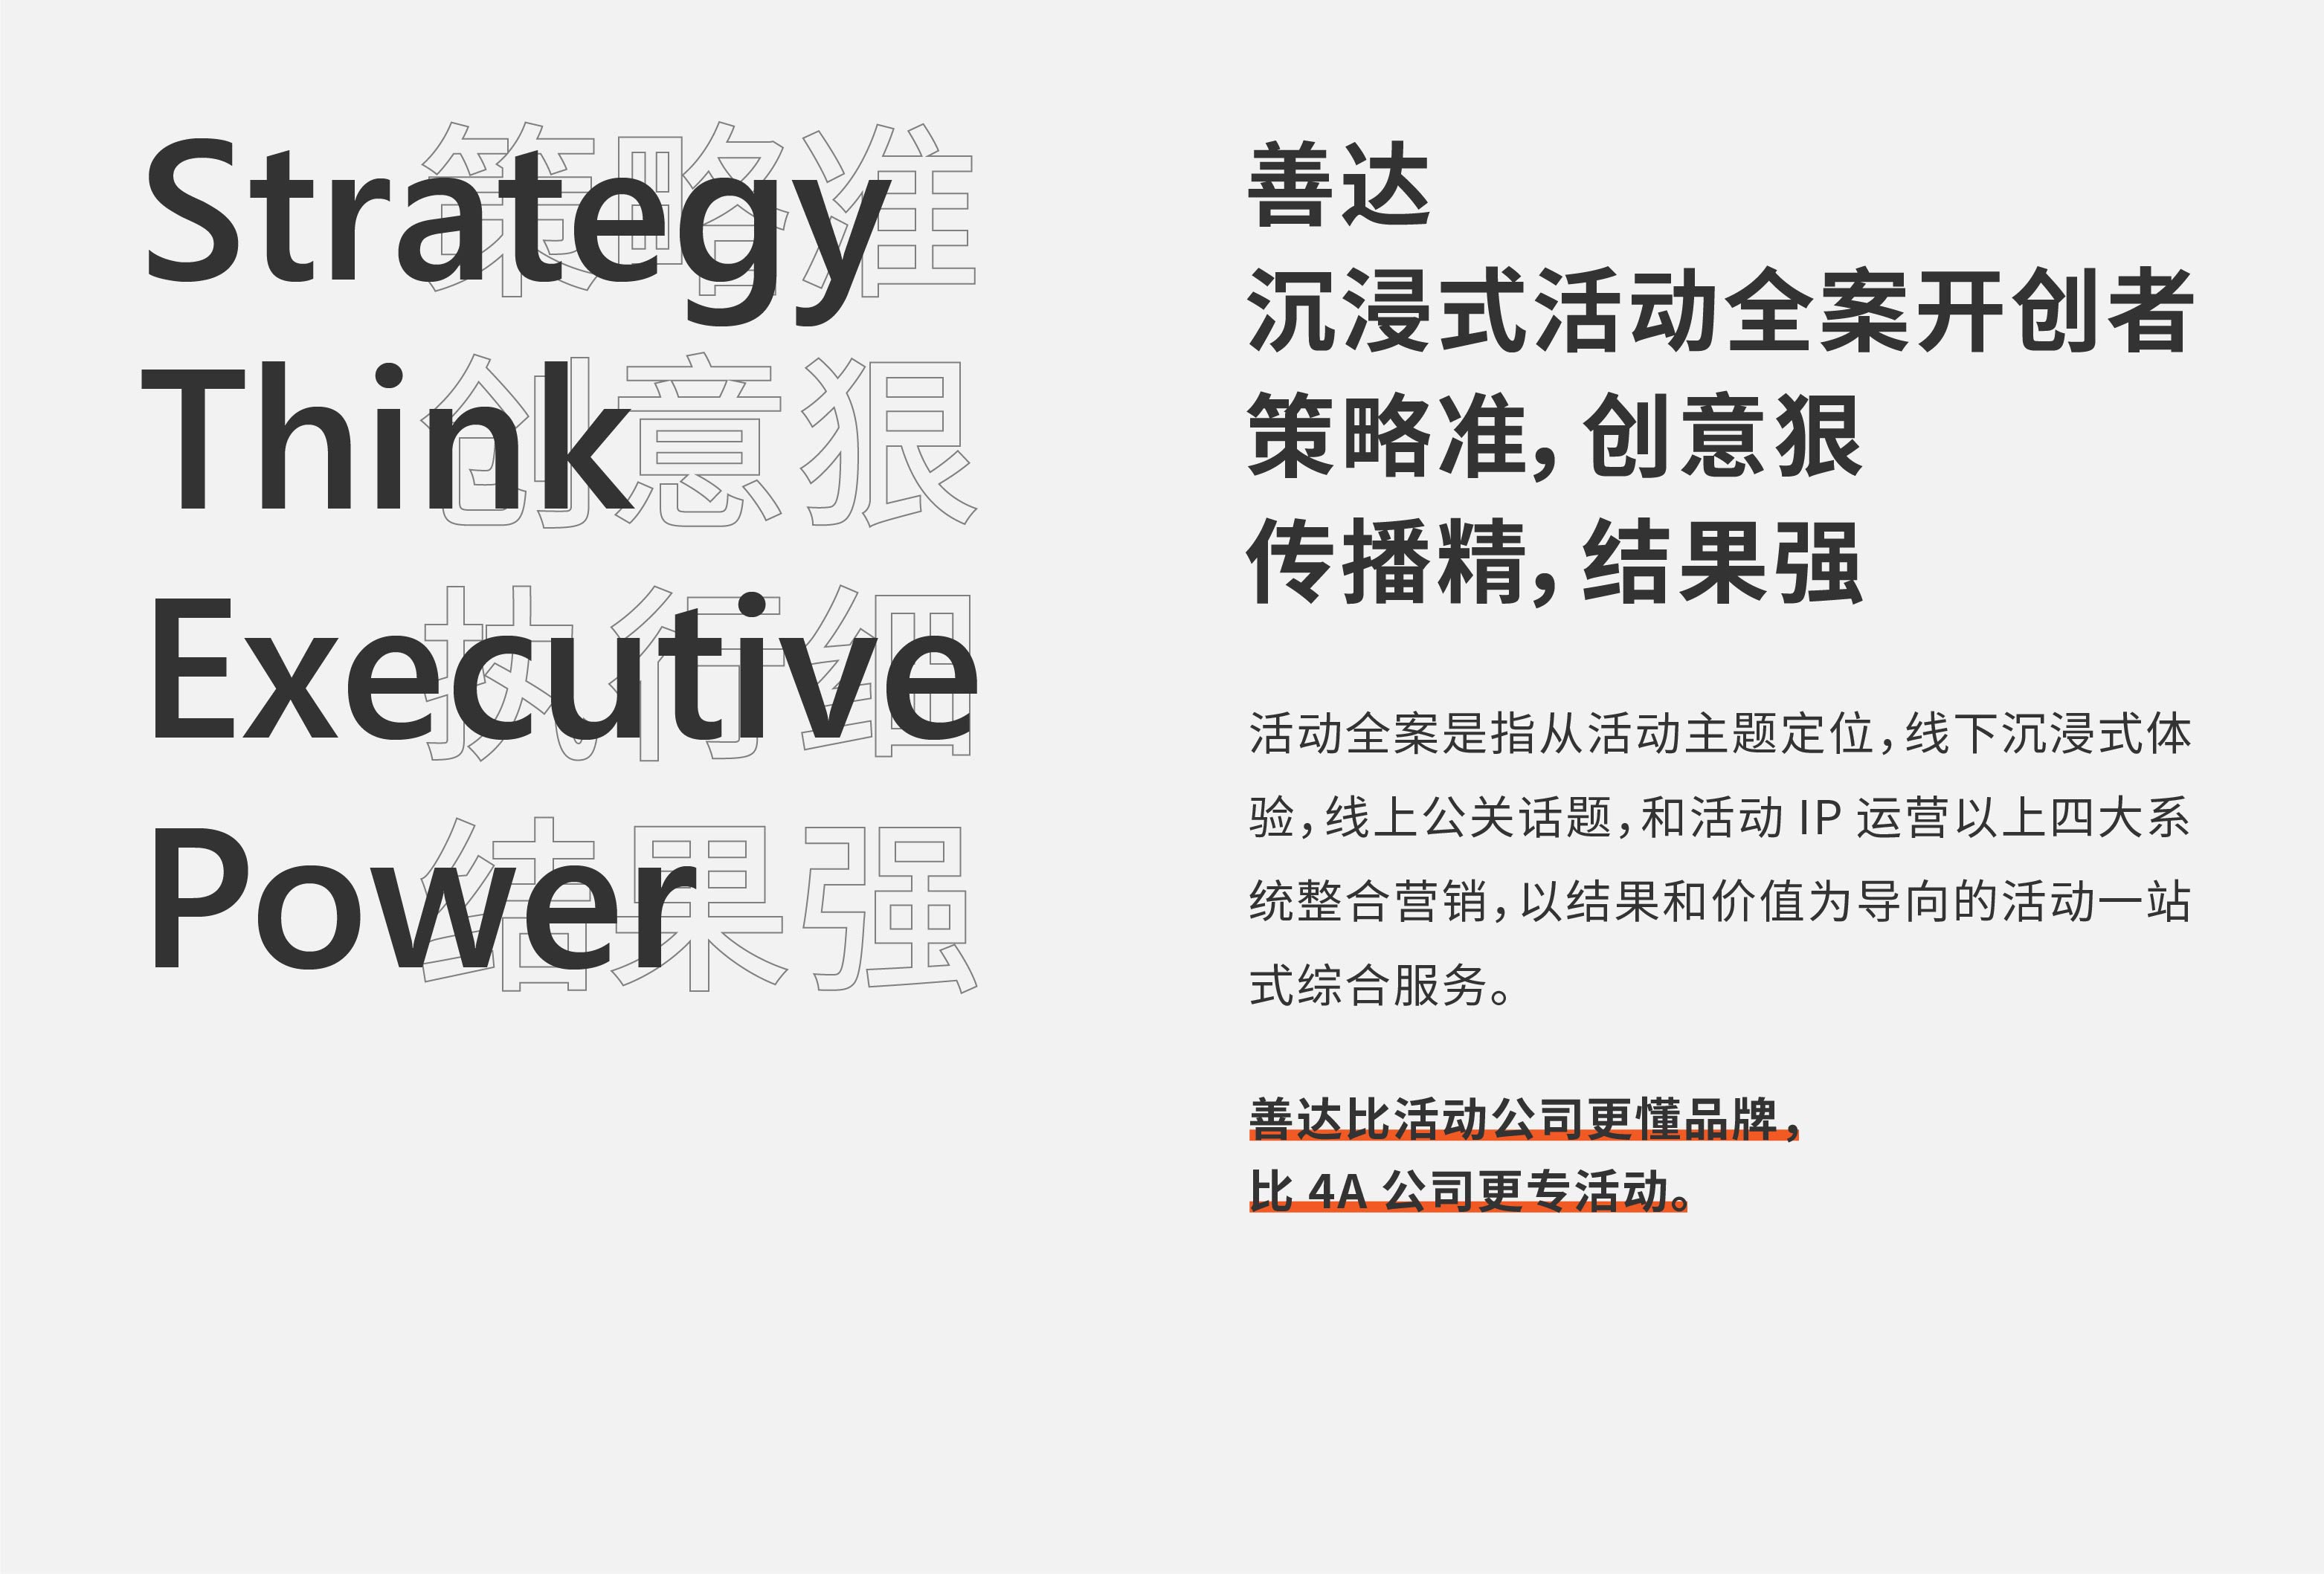 Strategy Think